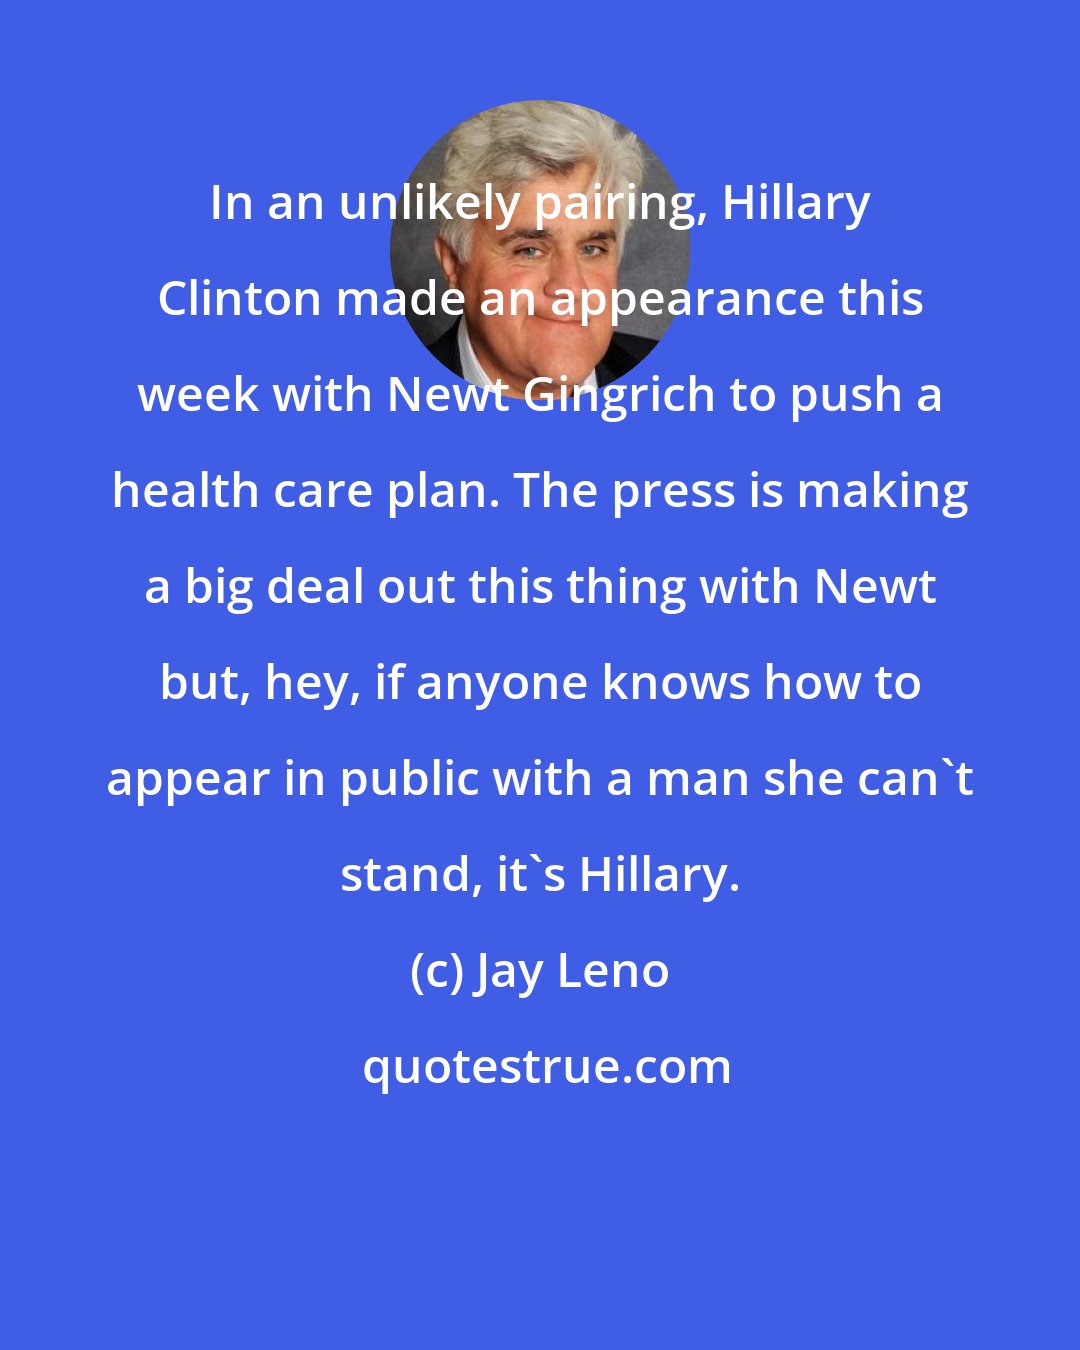 Jay Leno: In an unlikely pairing, Hillary Clinton made an appearance this week with Newt Gingrich to push a health care plan. The press is making a big deal out this thing with Newt but, hey, if anyone knows how to appear in public with a man she can't stand, it's Hillary.